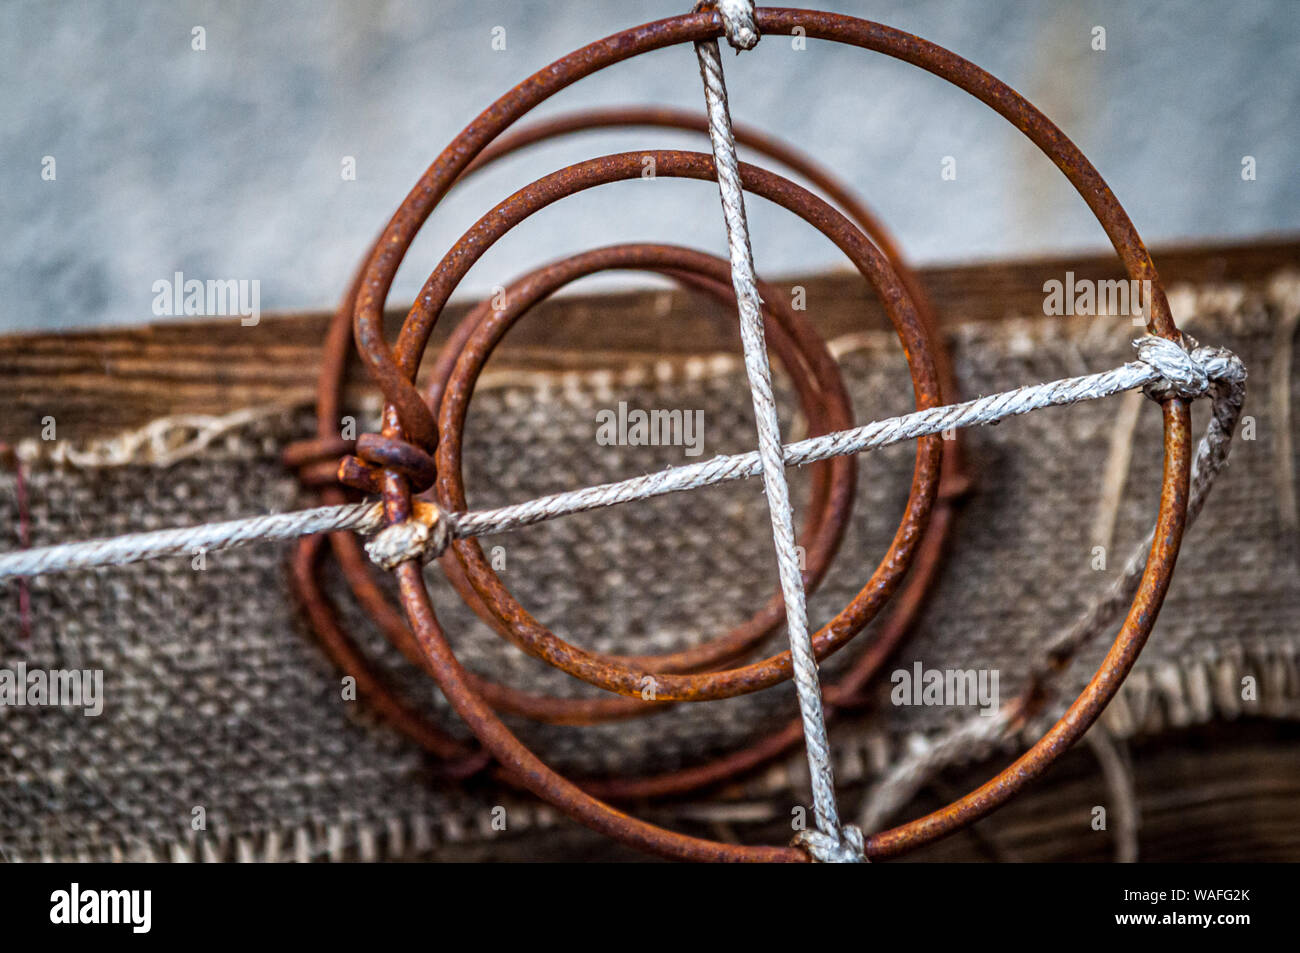 A very old exposed and worn bed spring dating to the early 20th century. Stock Photo